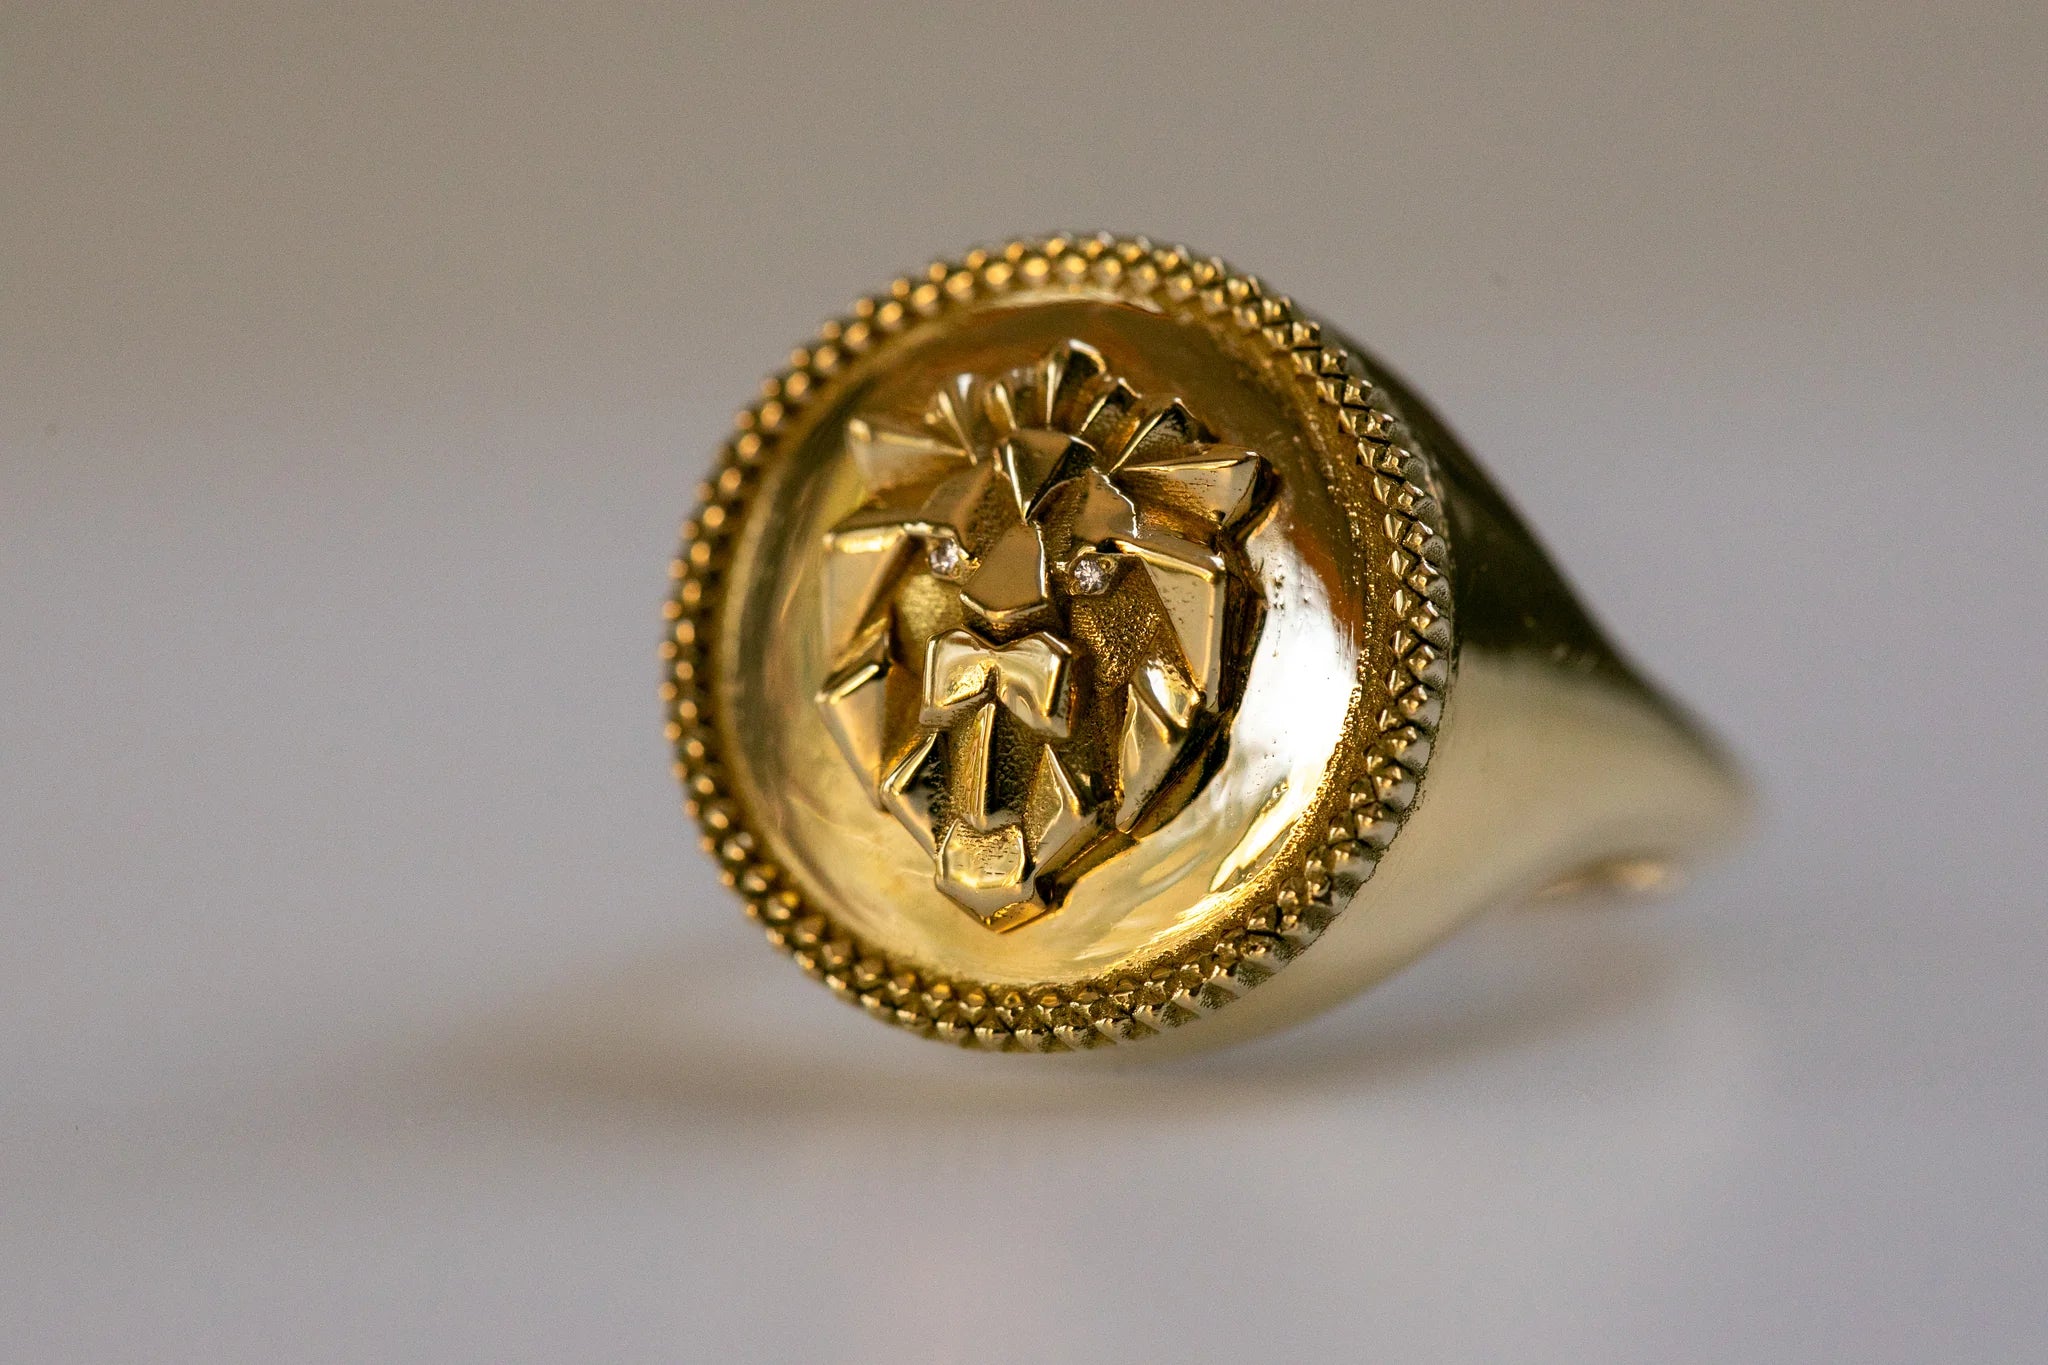 The Brave Signet Ring